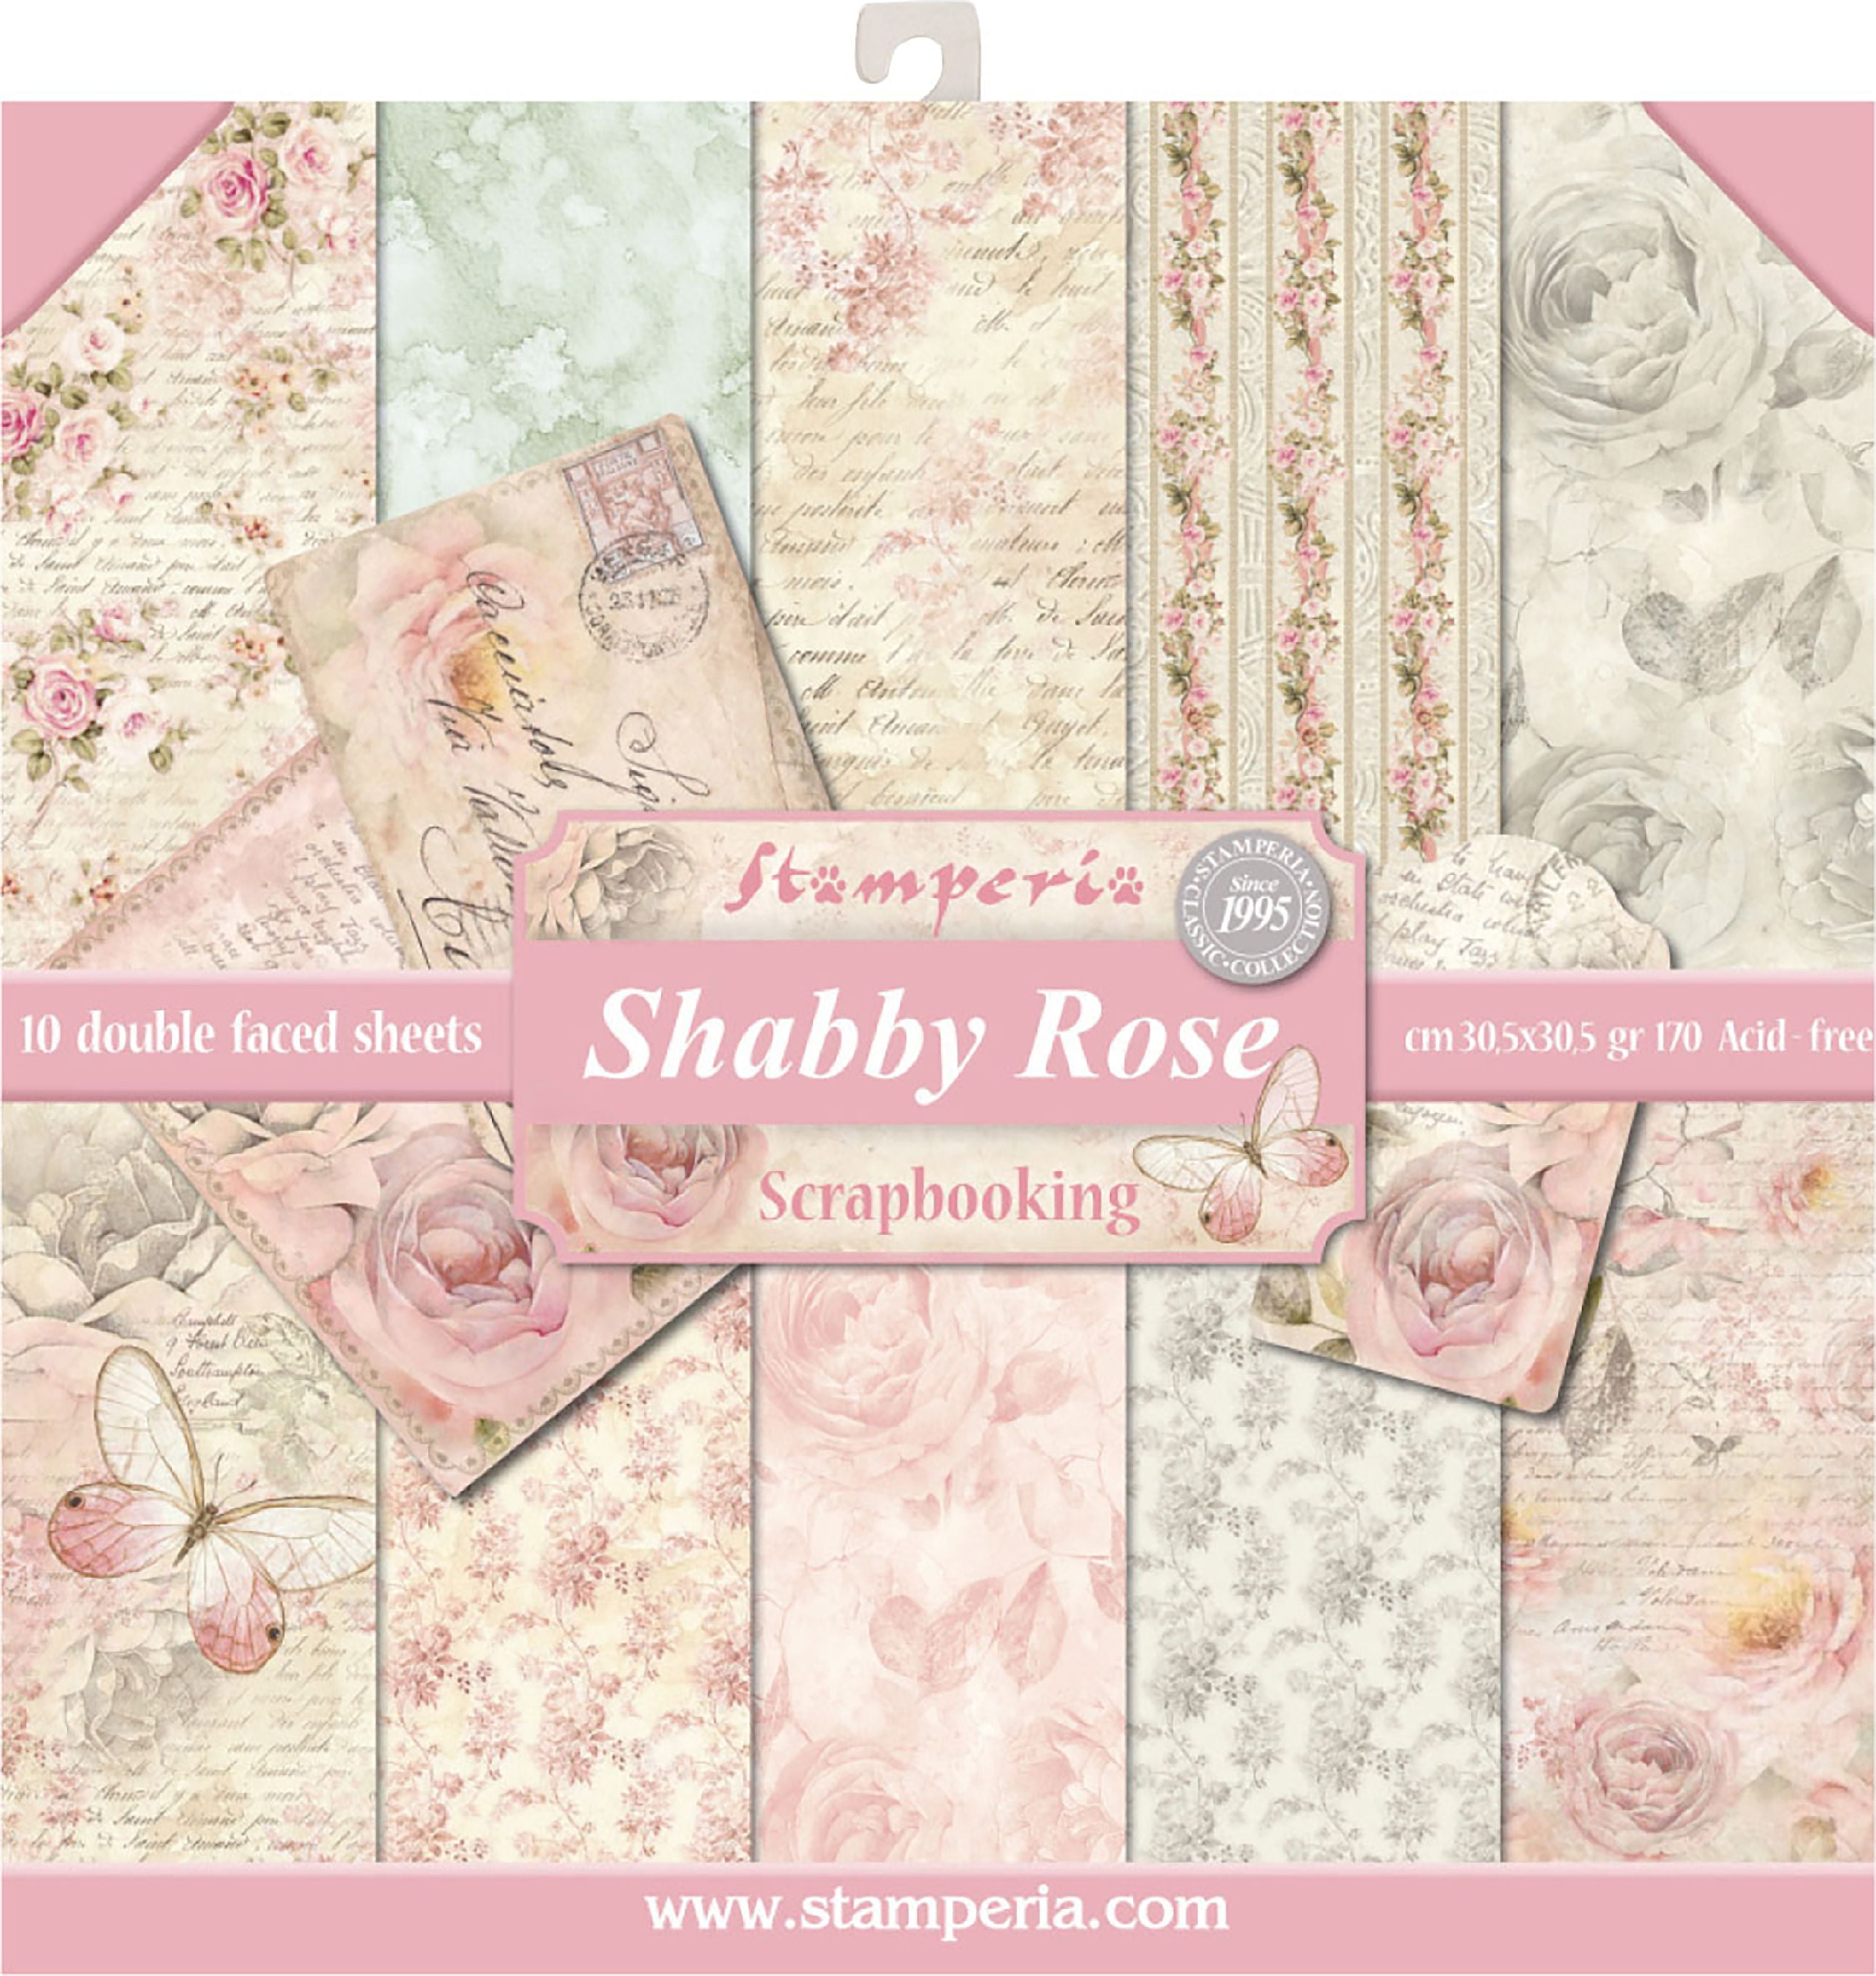 Stamperia Double-sided Paper Pad 12x12 10/pkg-roses, Lace & Wood